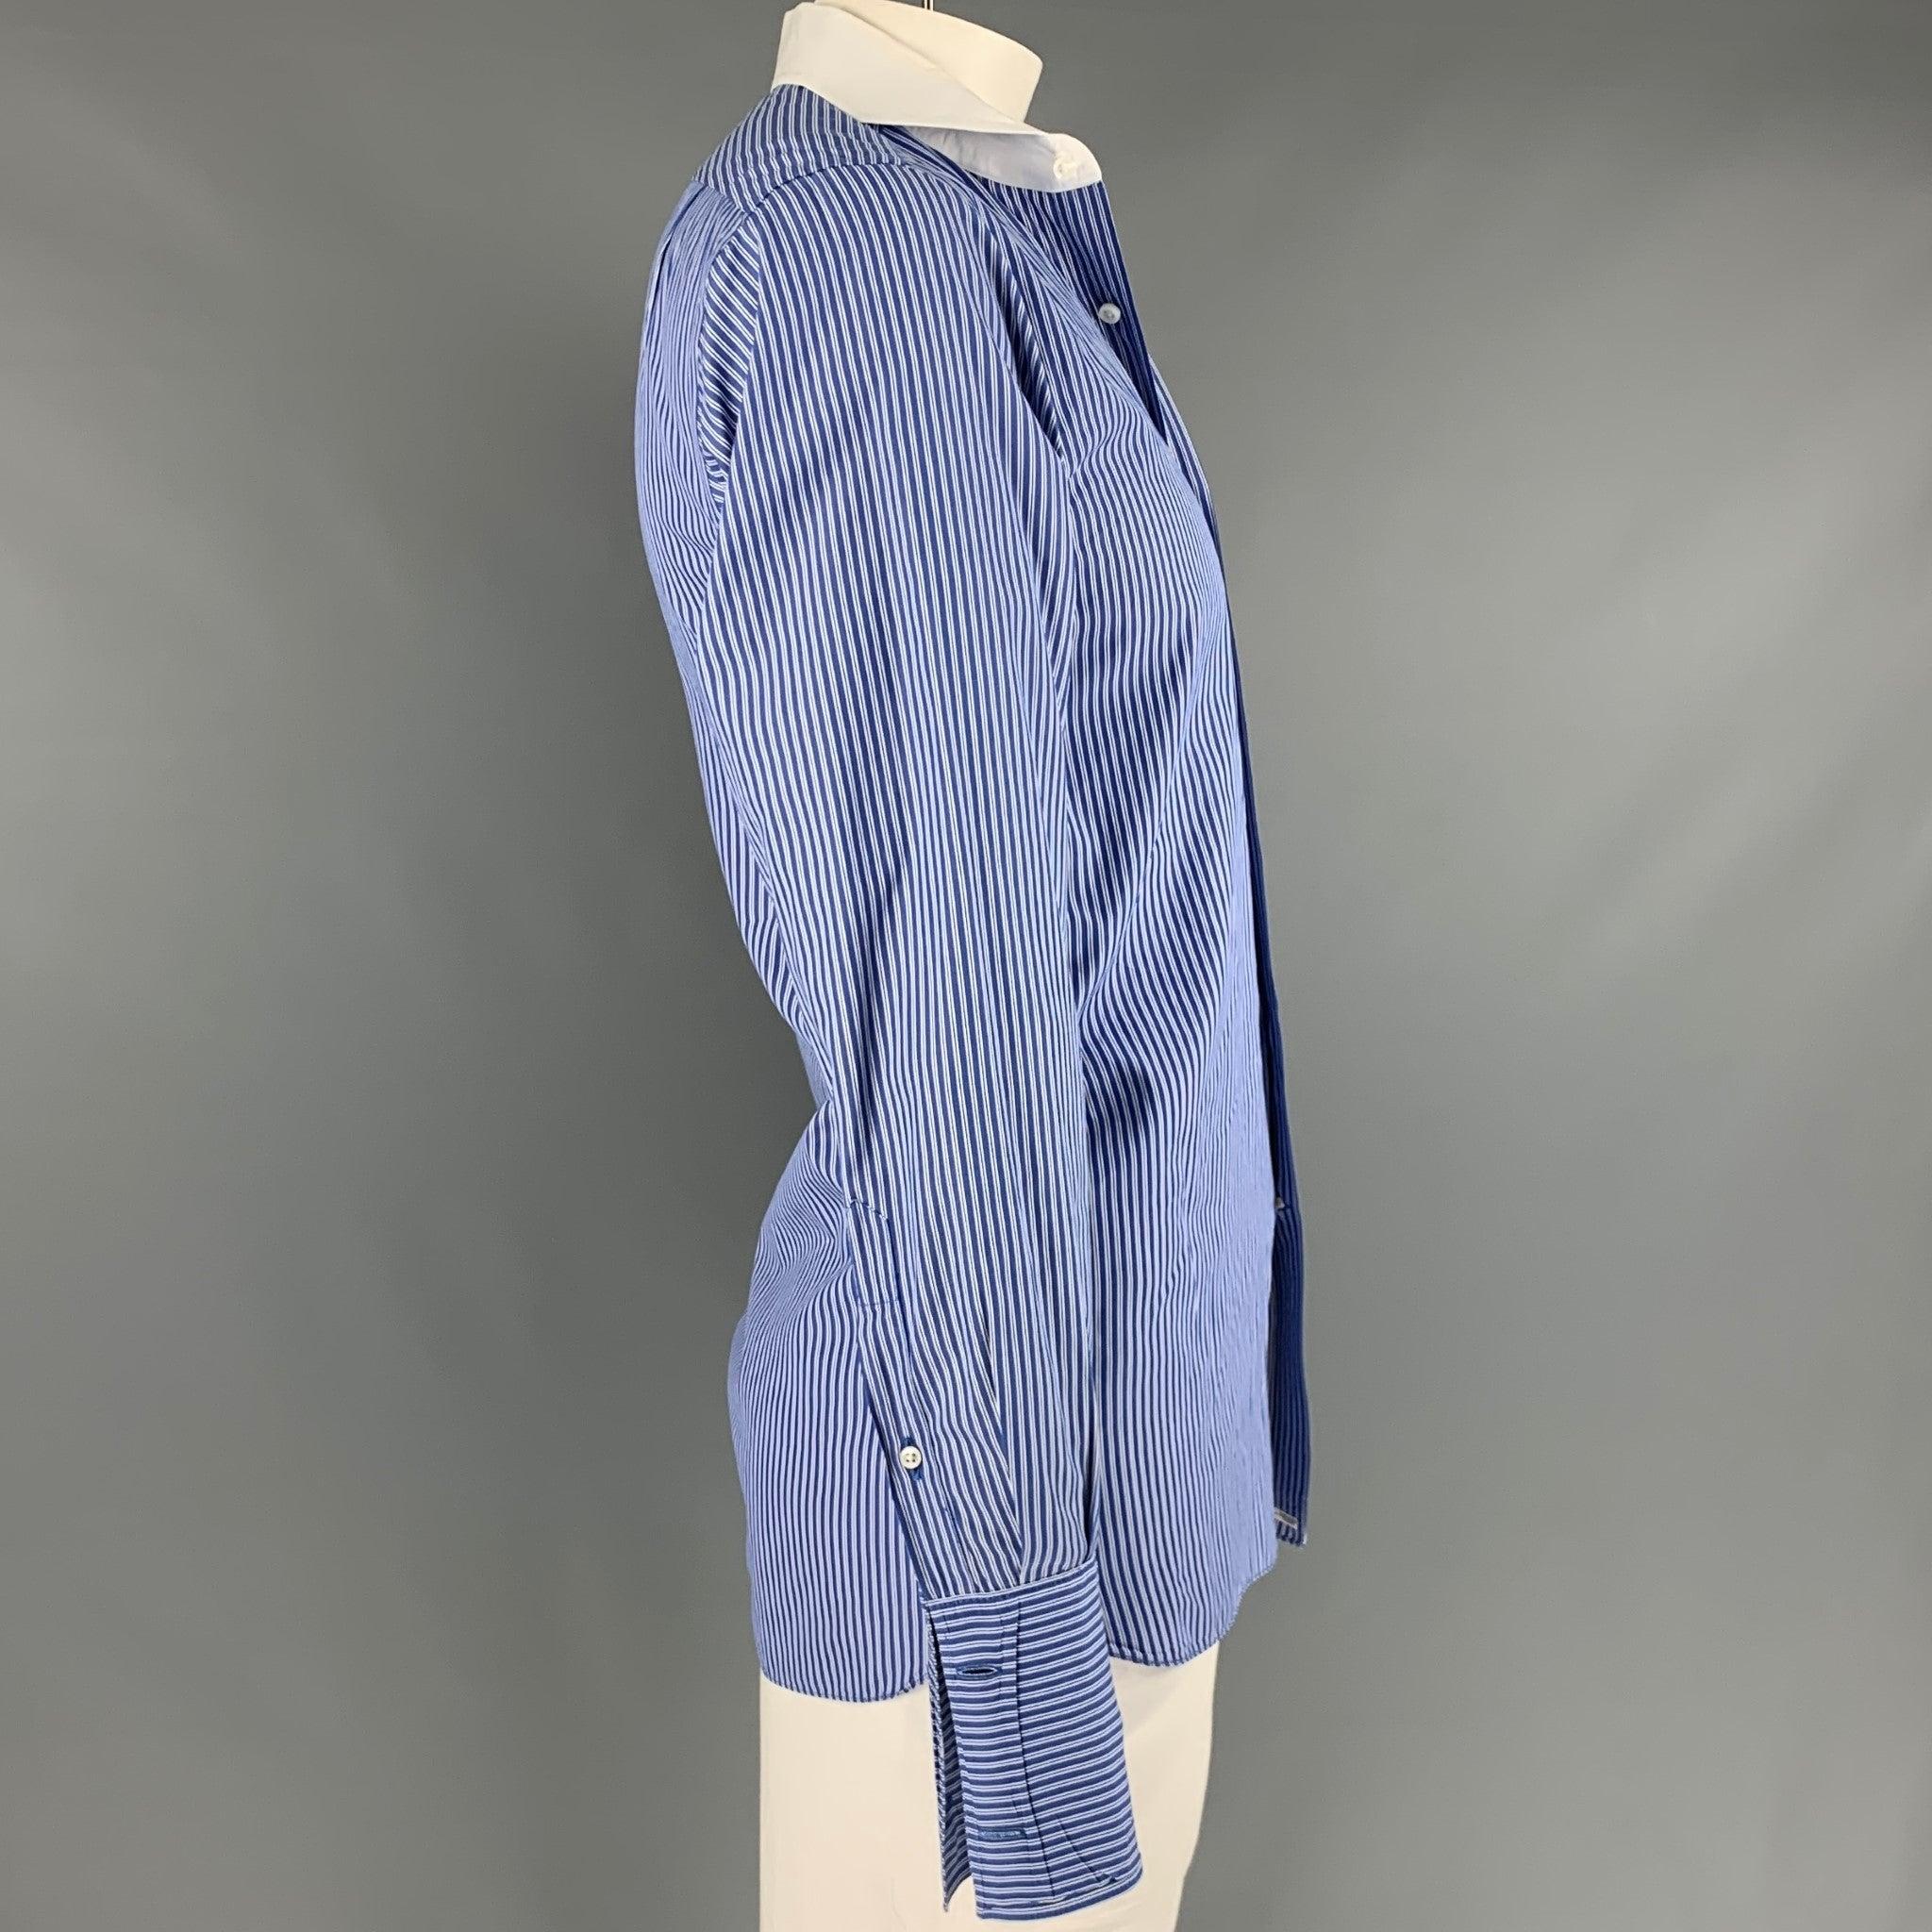 RALPH LAUREN PURPLE LABEL long sleeve shirt in a blue cotton fabric featuring white stripes, a white spread collar, and French cuffs. Made in Italy.Excellent Pre-Owned Condition. 

Marked:   16 

Measurements: 
 
Shoulder: 17 inches Chest: 41 inches